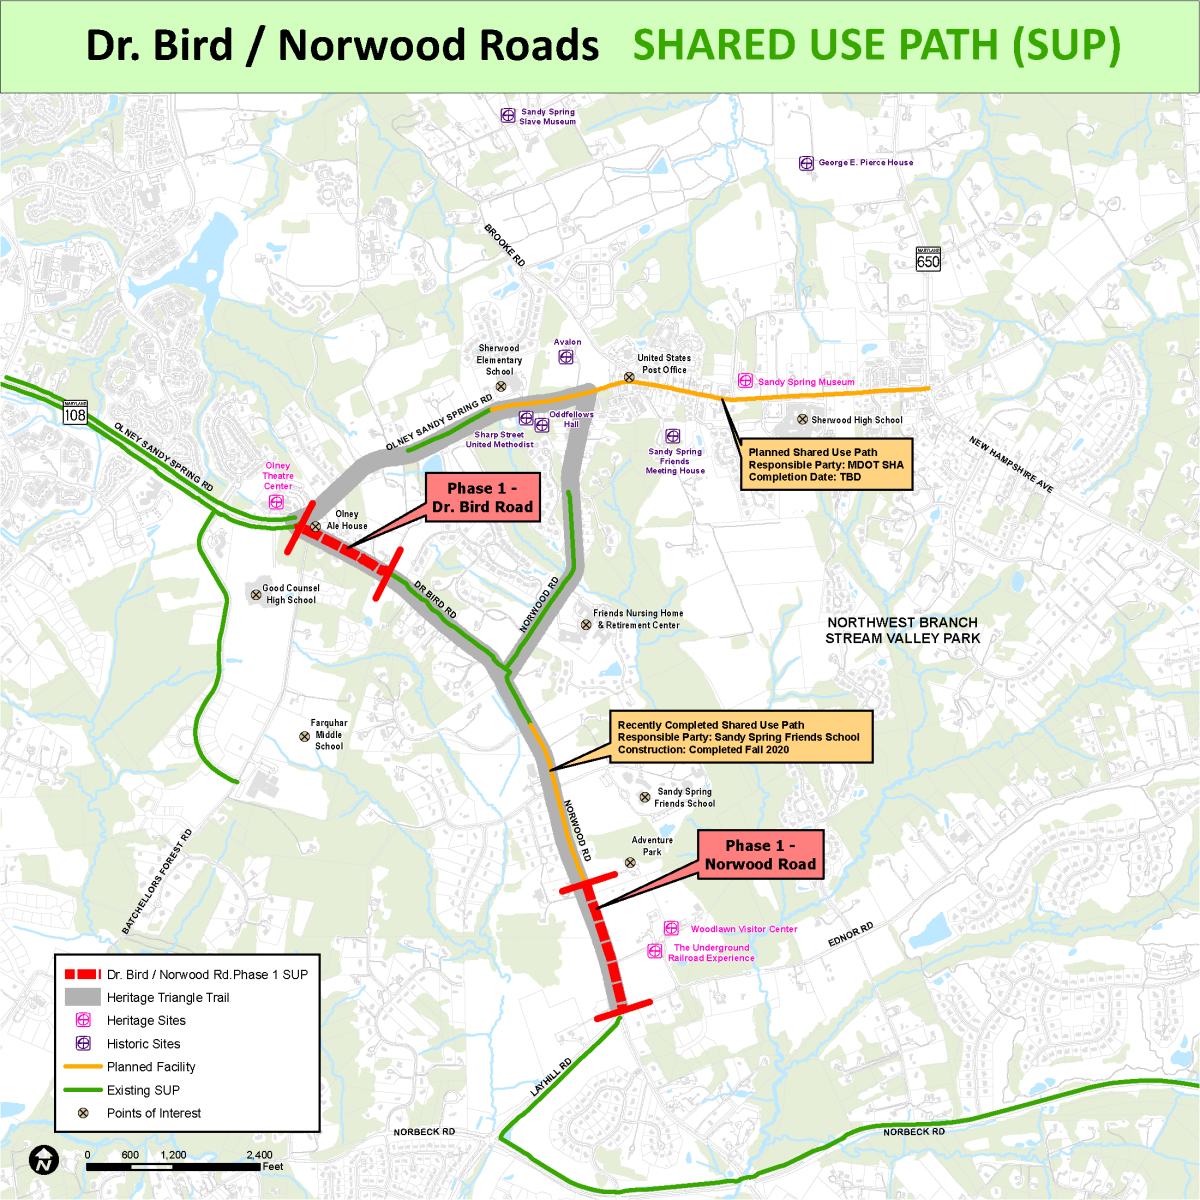 Heritage Triangle Trail – Phase I, Dr. Bird/Norwood Road from MD 108 to Layhill Road